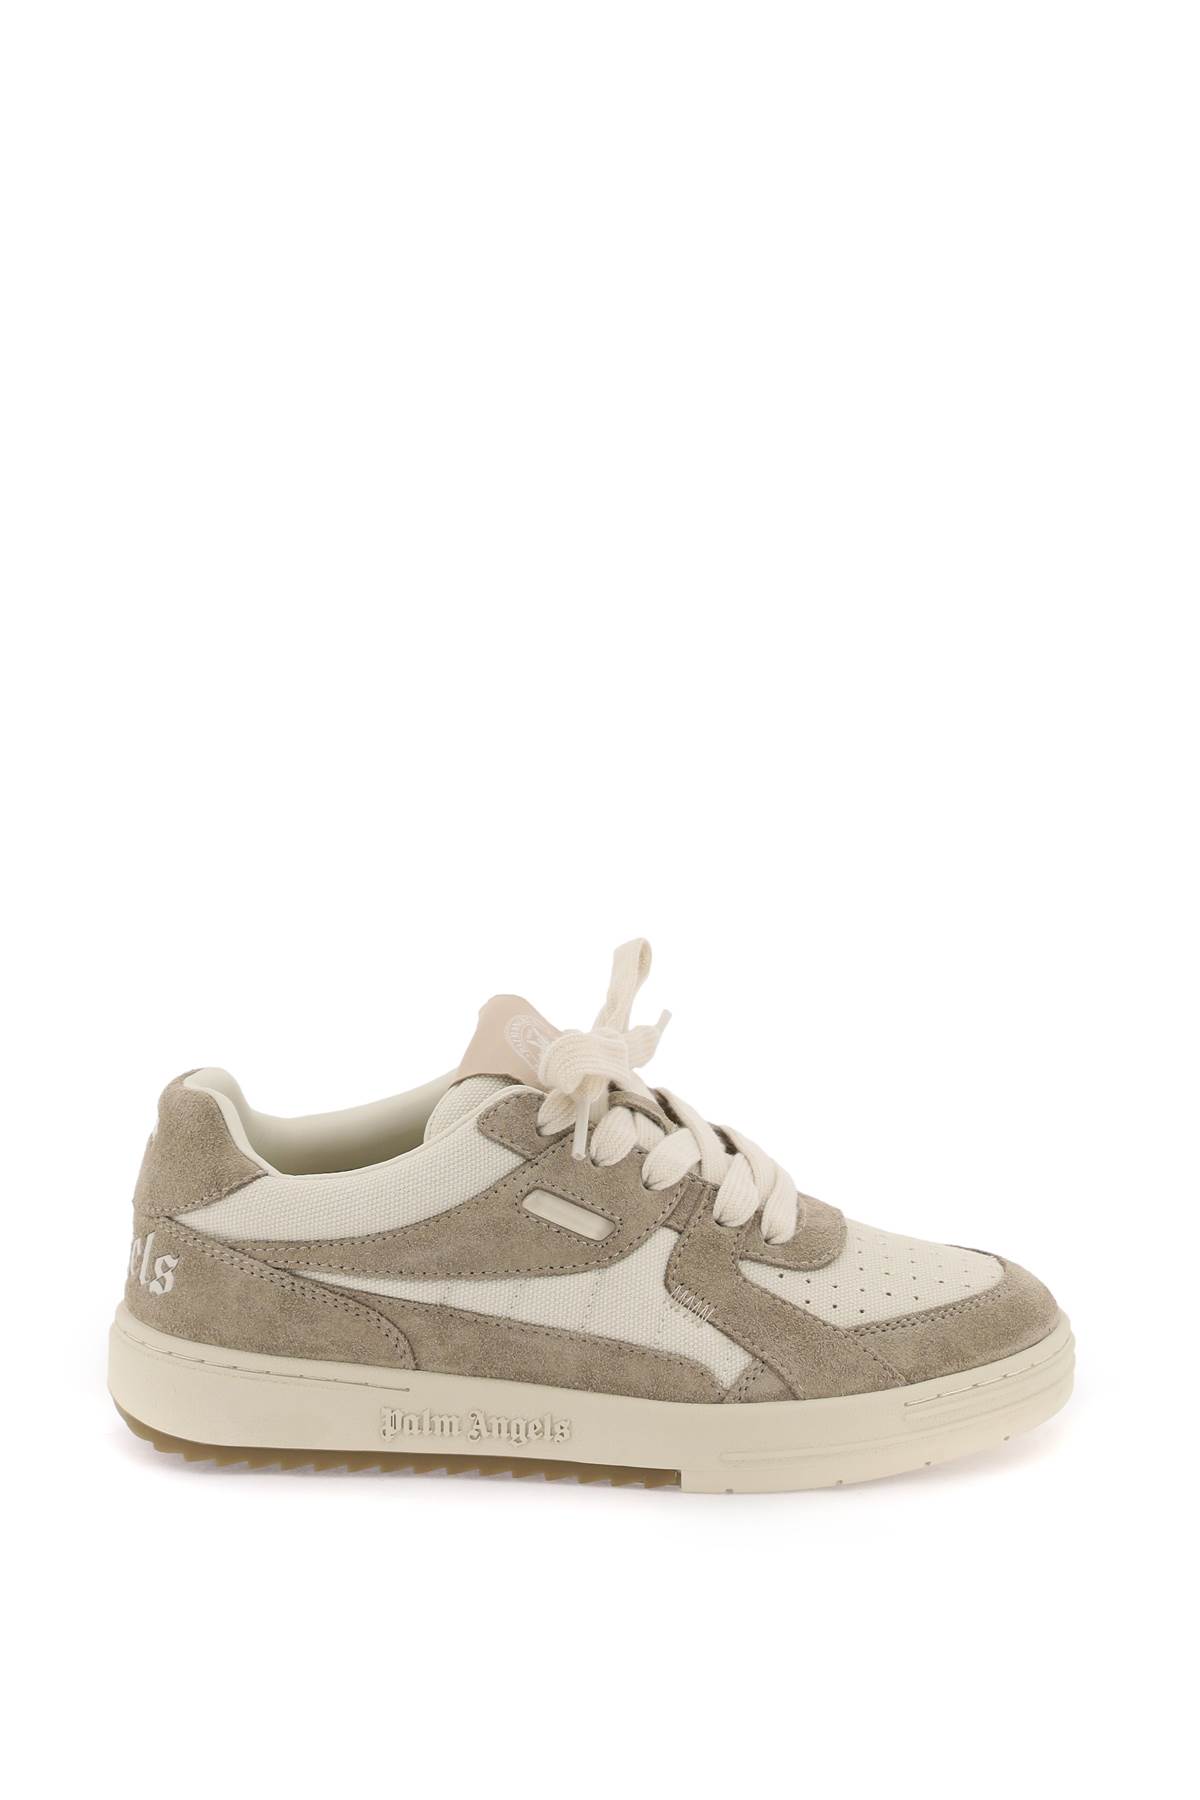 Palm Angels university Two-tone Leather Blend Sneakers